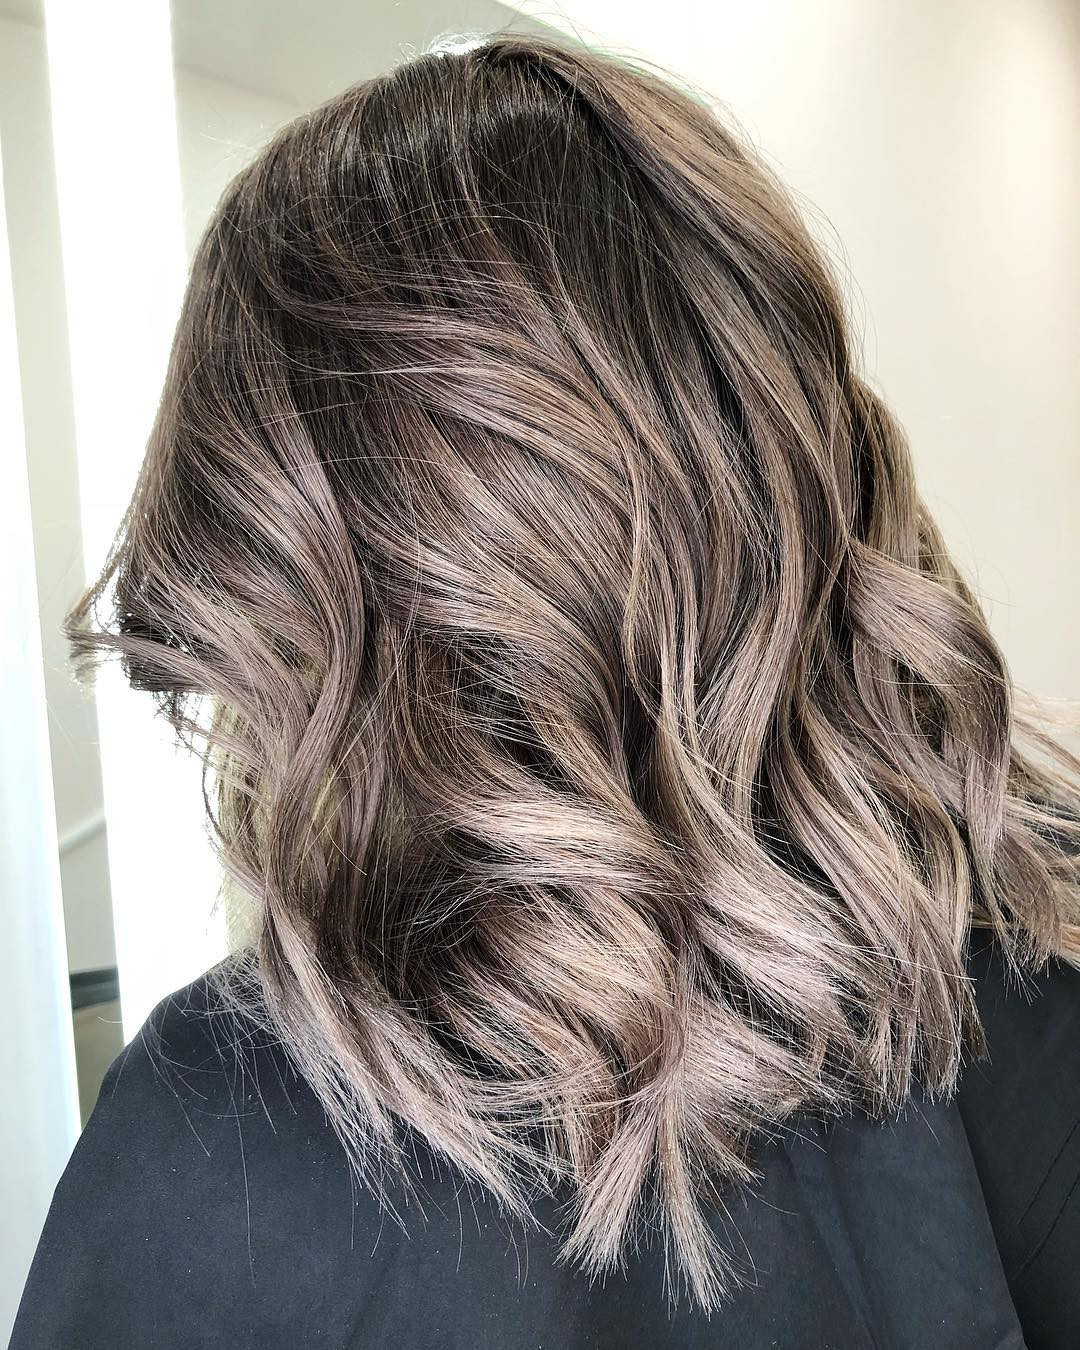 Hairstyles And Colors For Medium Length Hair
 10 Balayage Hair Styles for Medium Length Hair 2020